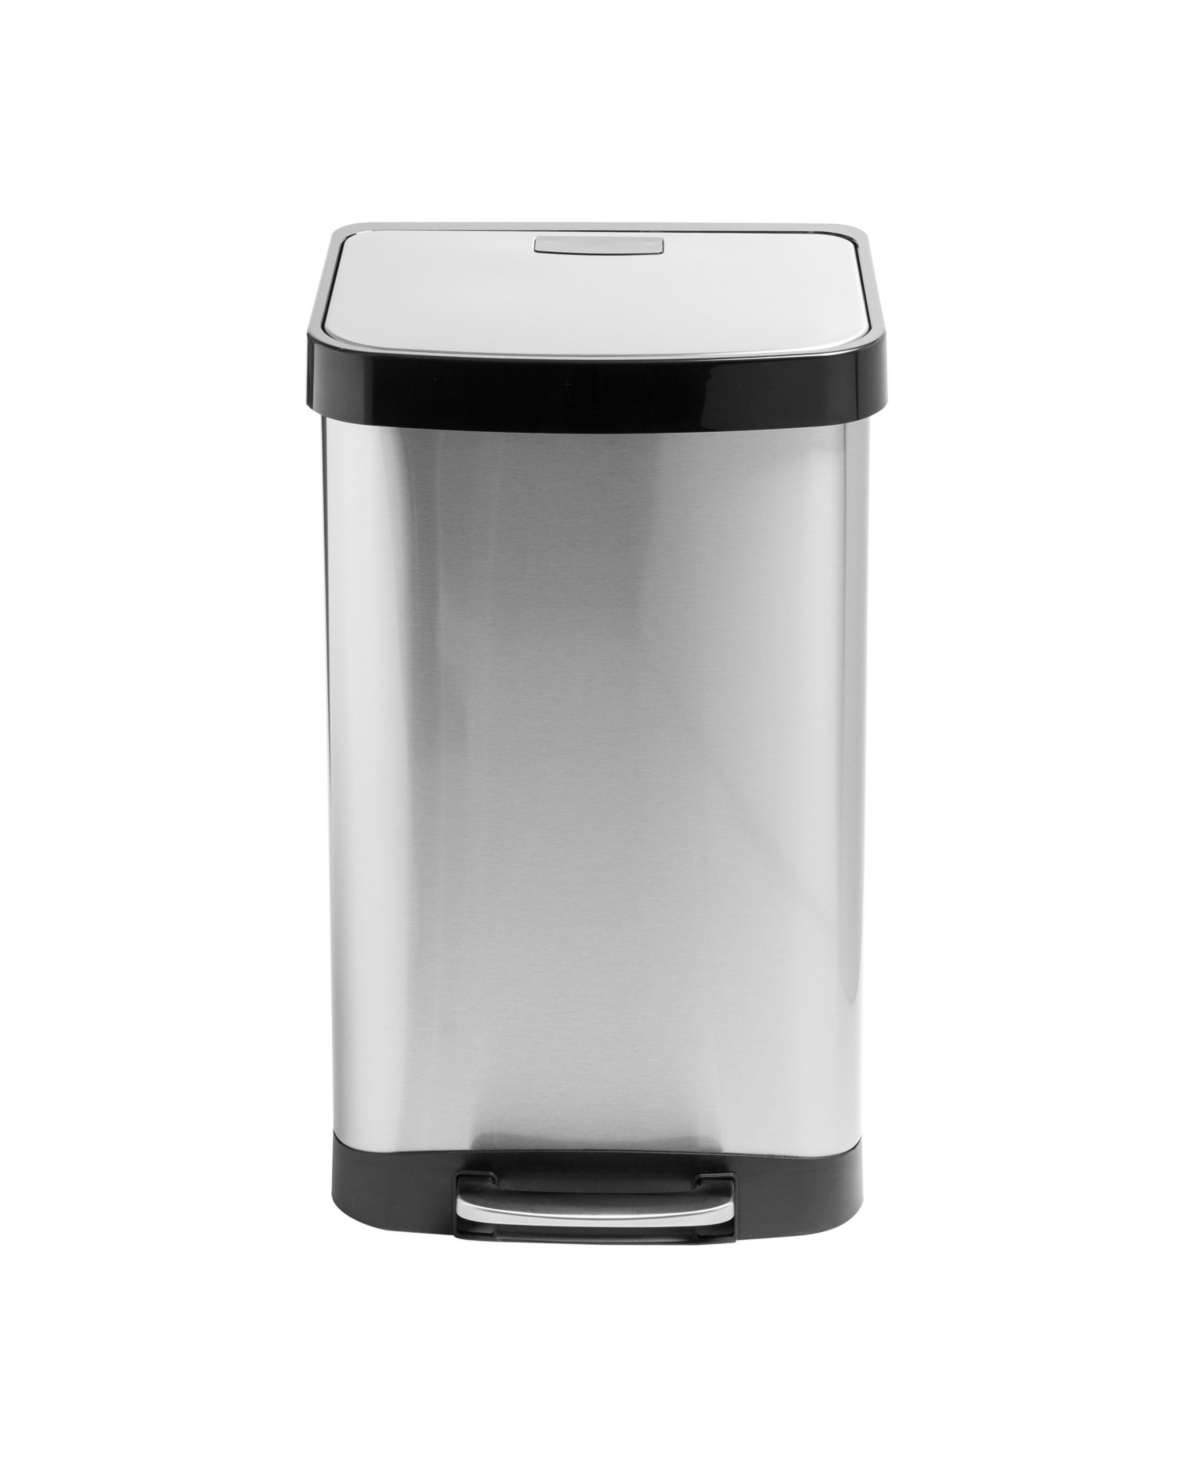 Large Stainless Steel Step Trash Can with Lid - Silver-Tone